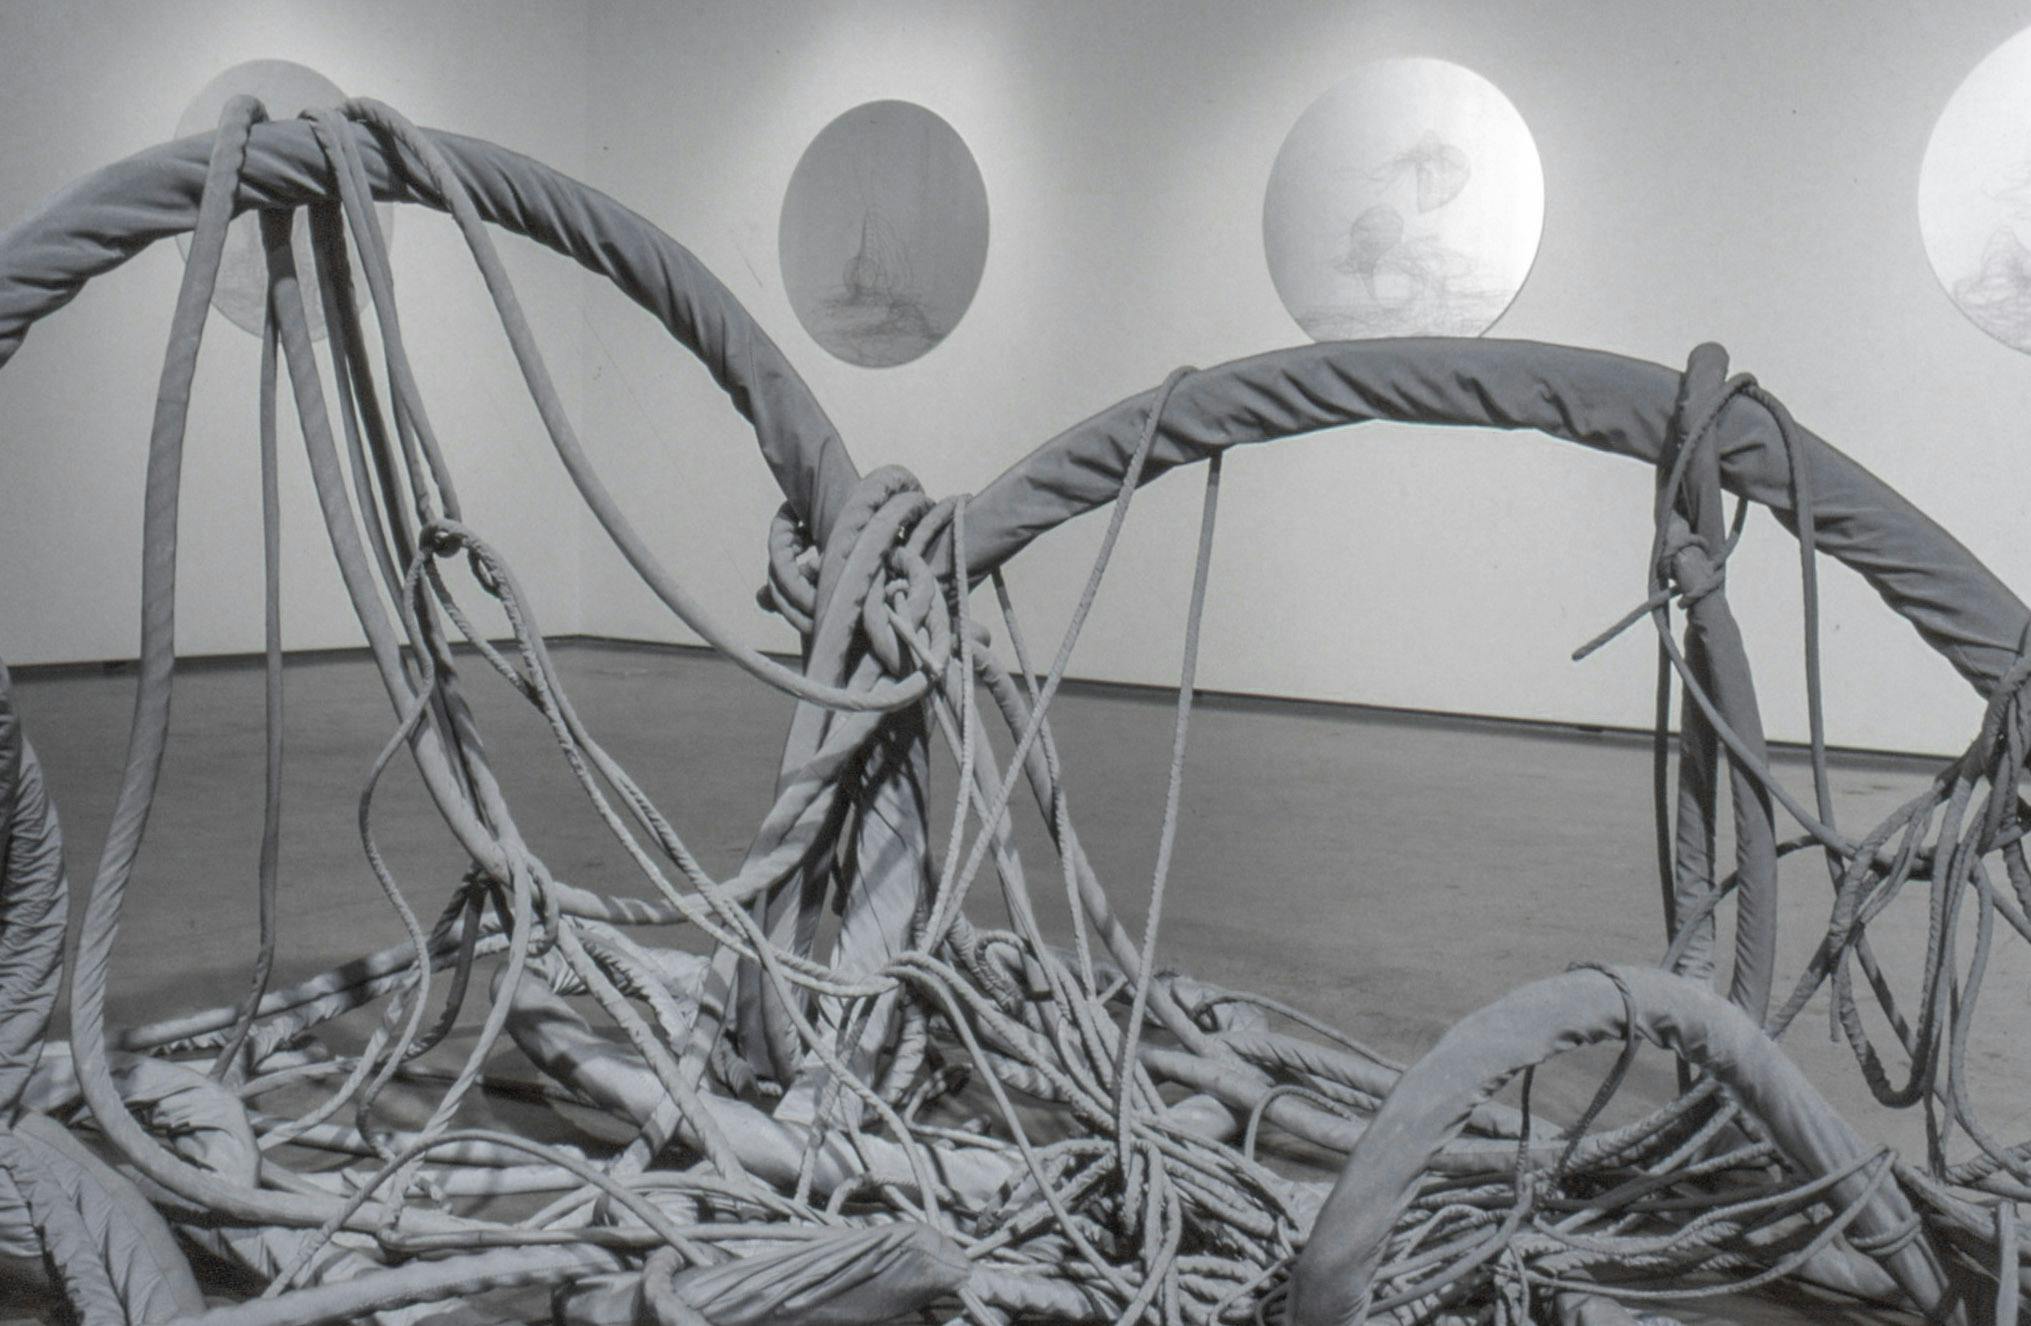 A large grey sculpture that looks like a tangled fishing net is placed in the middle of the gallery floor. Four circular shaped sculptures that resemble white marble are mounted on the walls. 